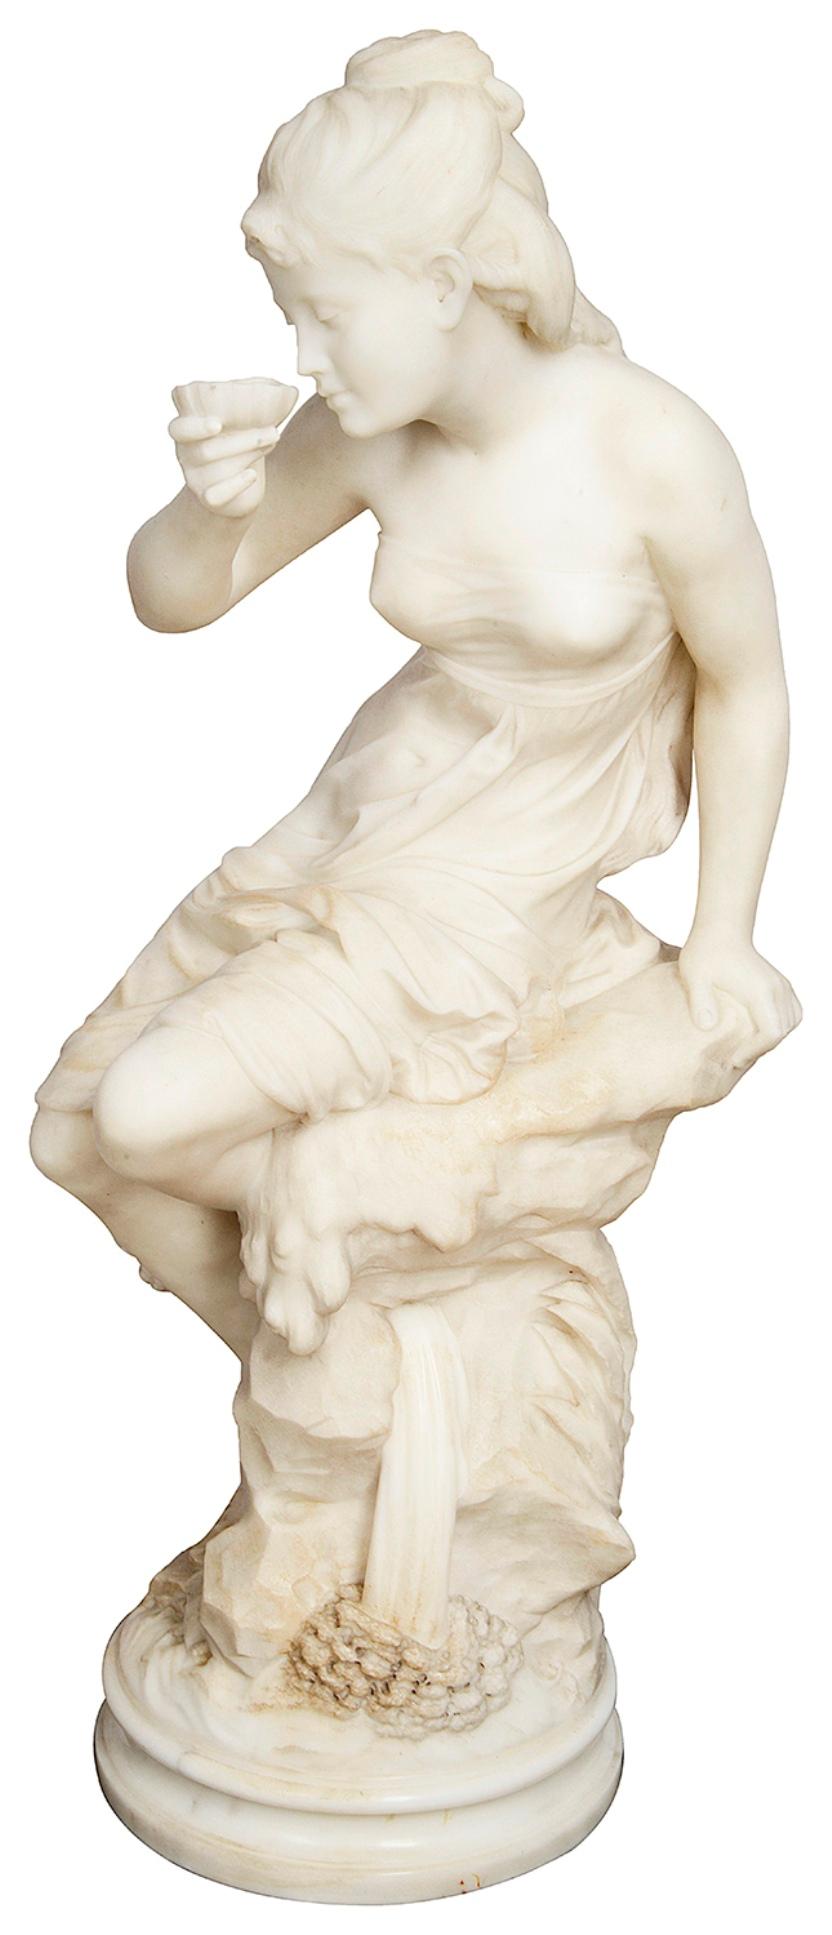 Hand-Carved 19th Century Marble Statue of a Young Girl, by Orazio Andreoni